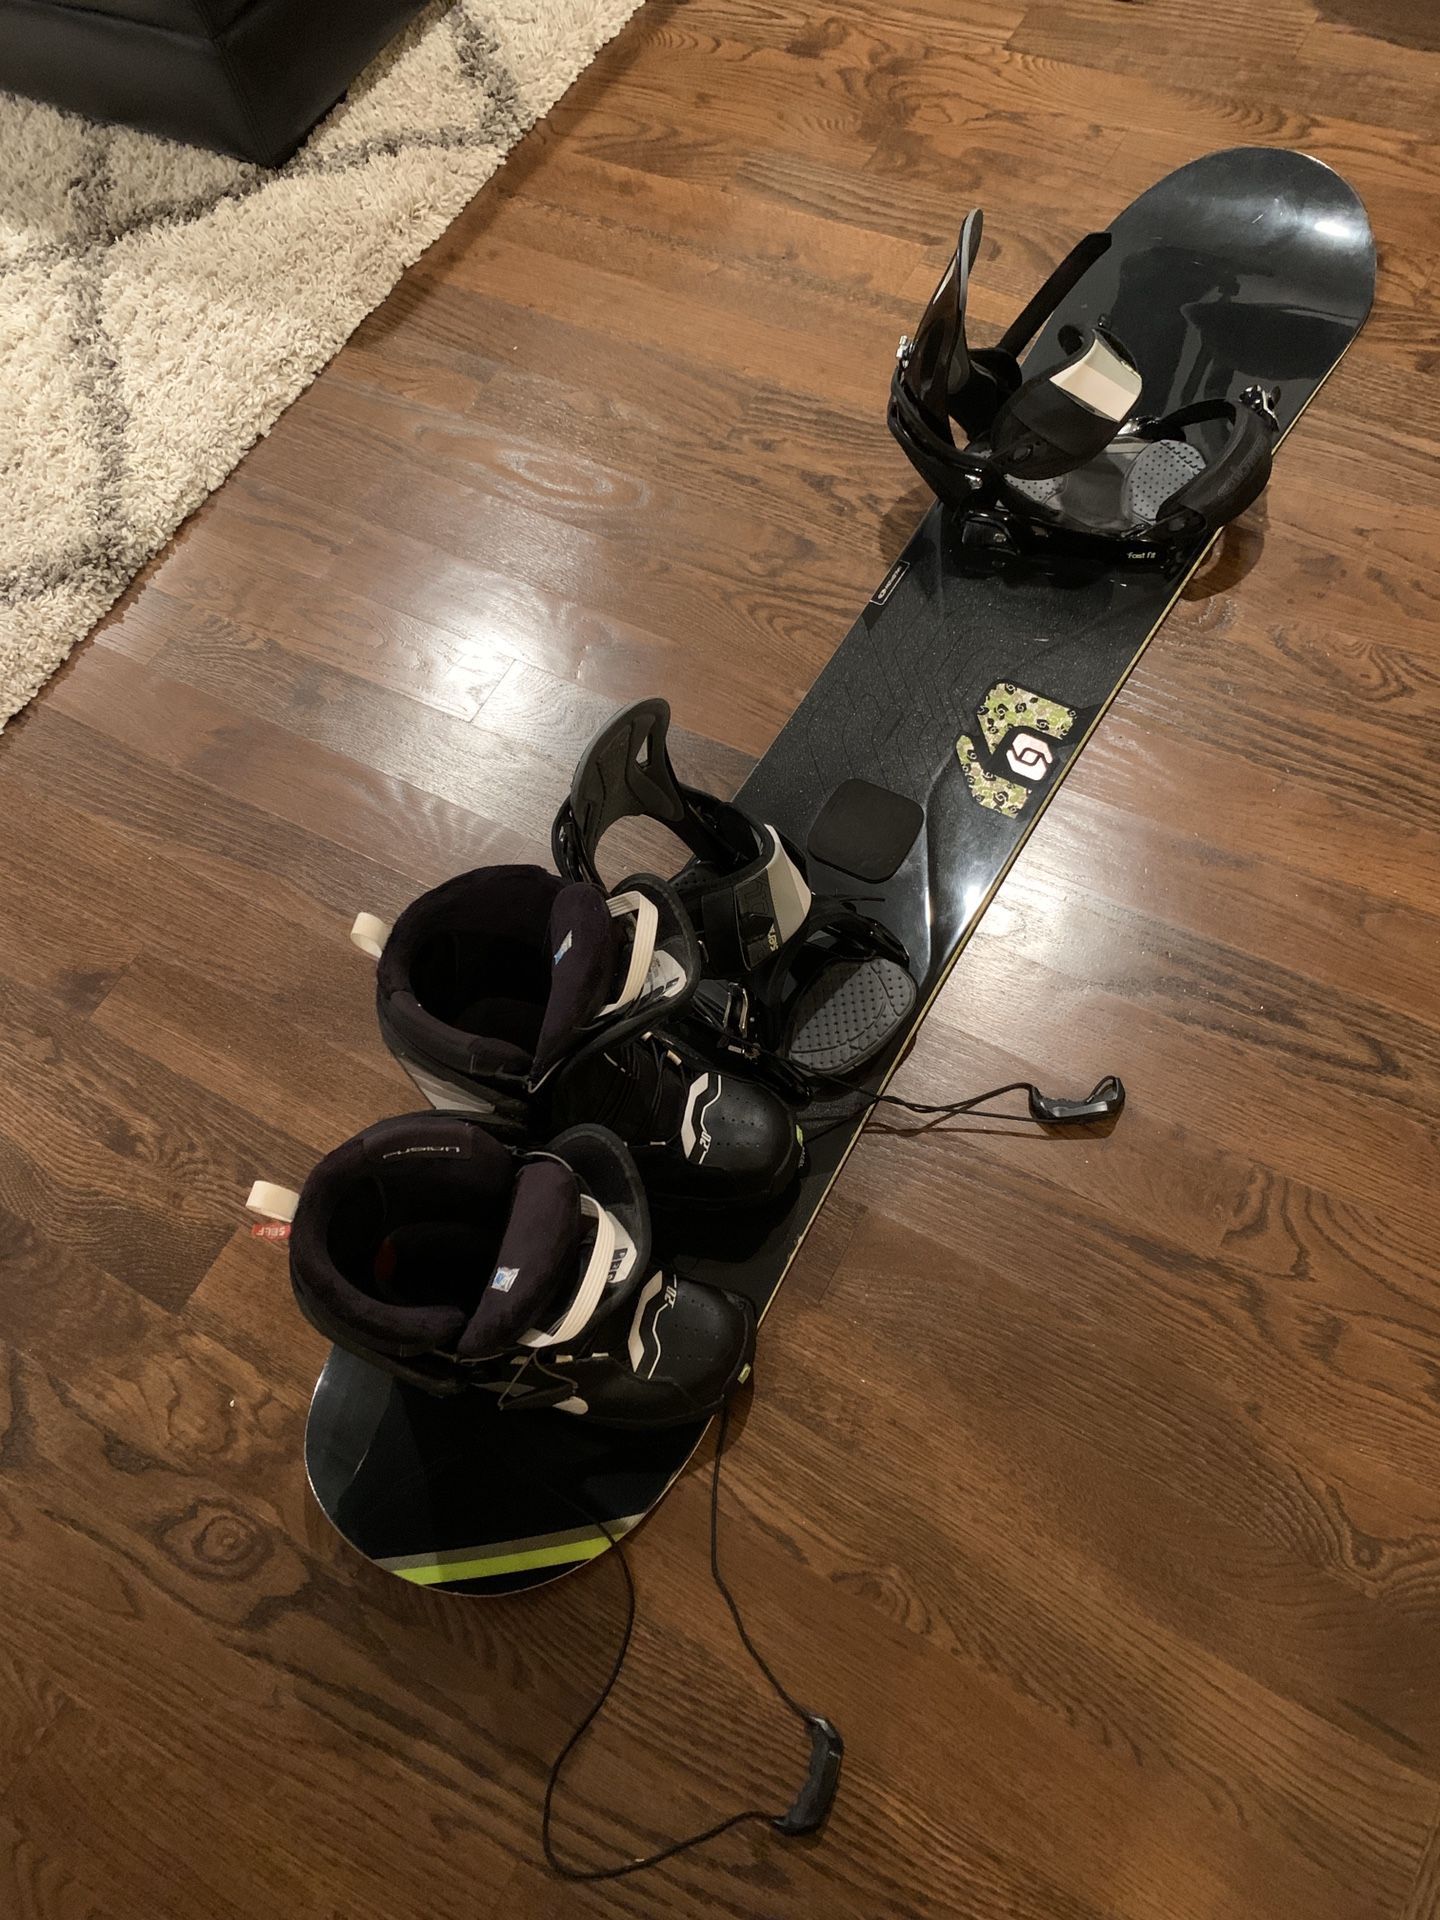 Salomon Special 159 Snowboard with boots and bindings